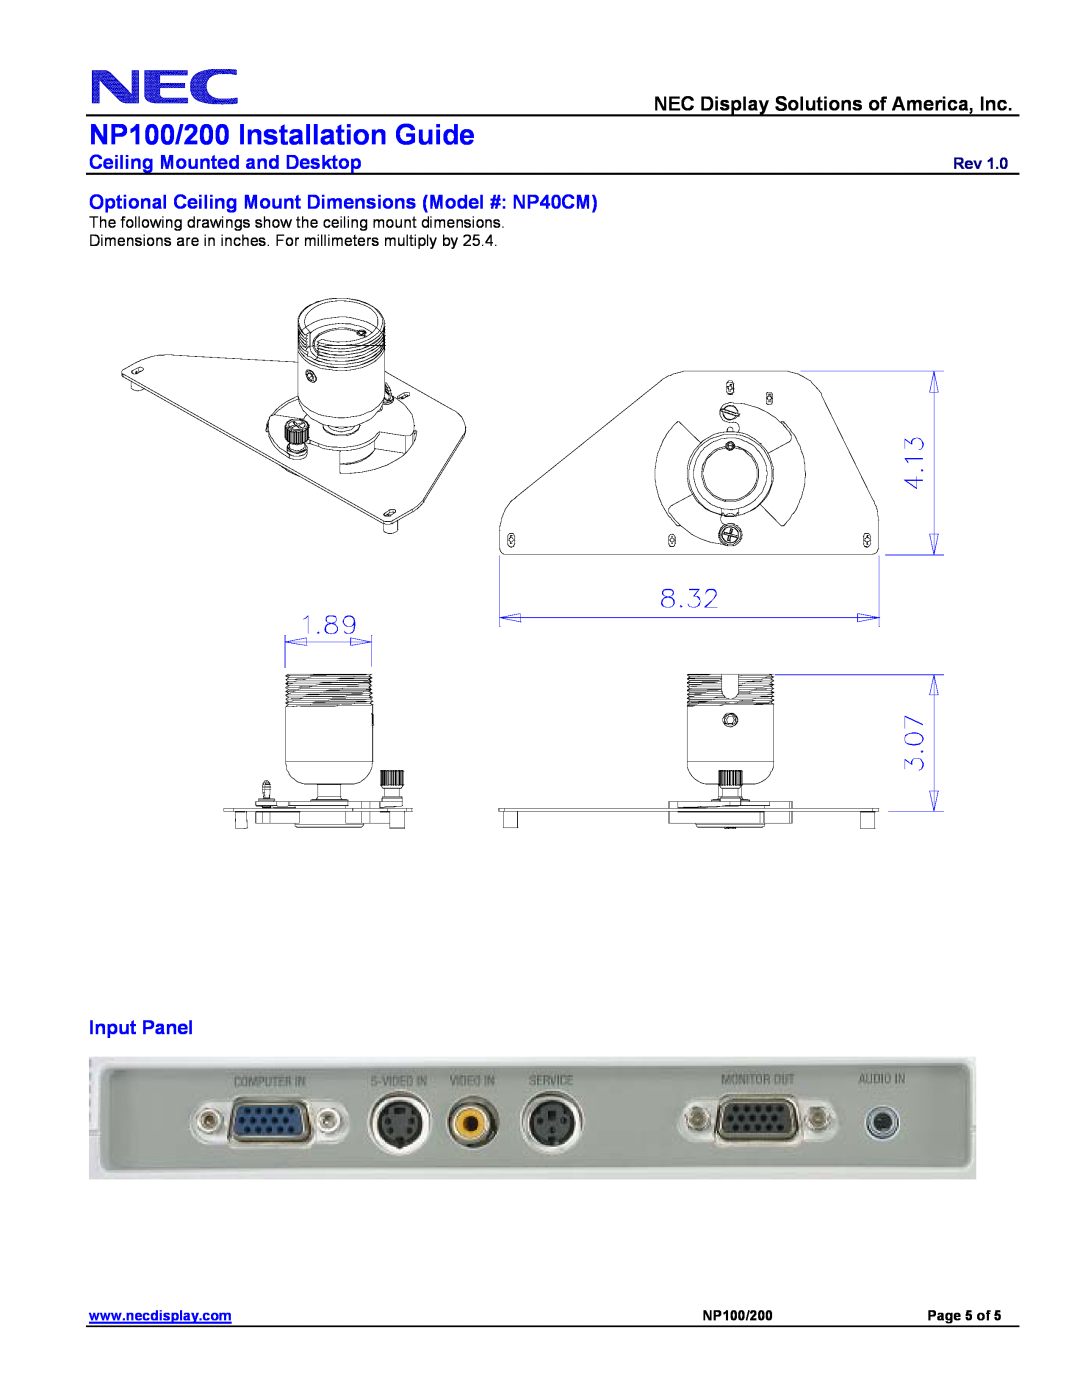 NEC specifications Optional Ceiling Mount Dimensions Model # NP40CM, Input Panel, NP100/200 Installation Guide 